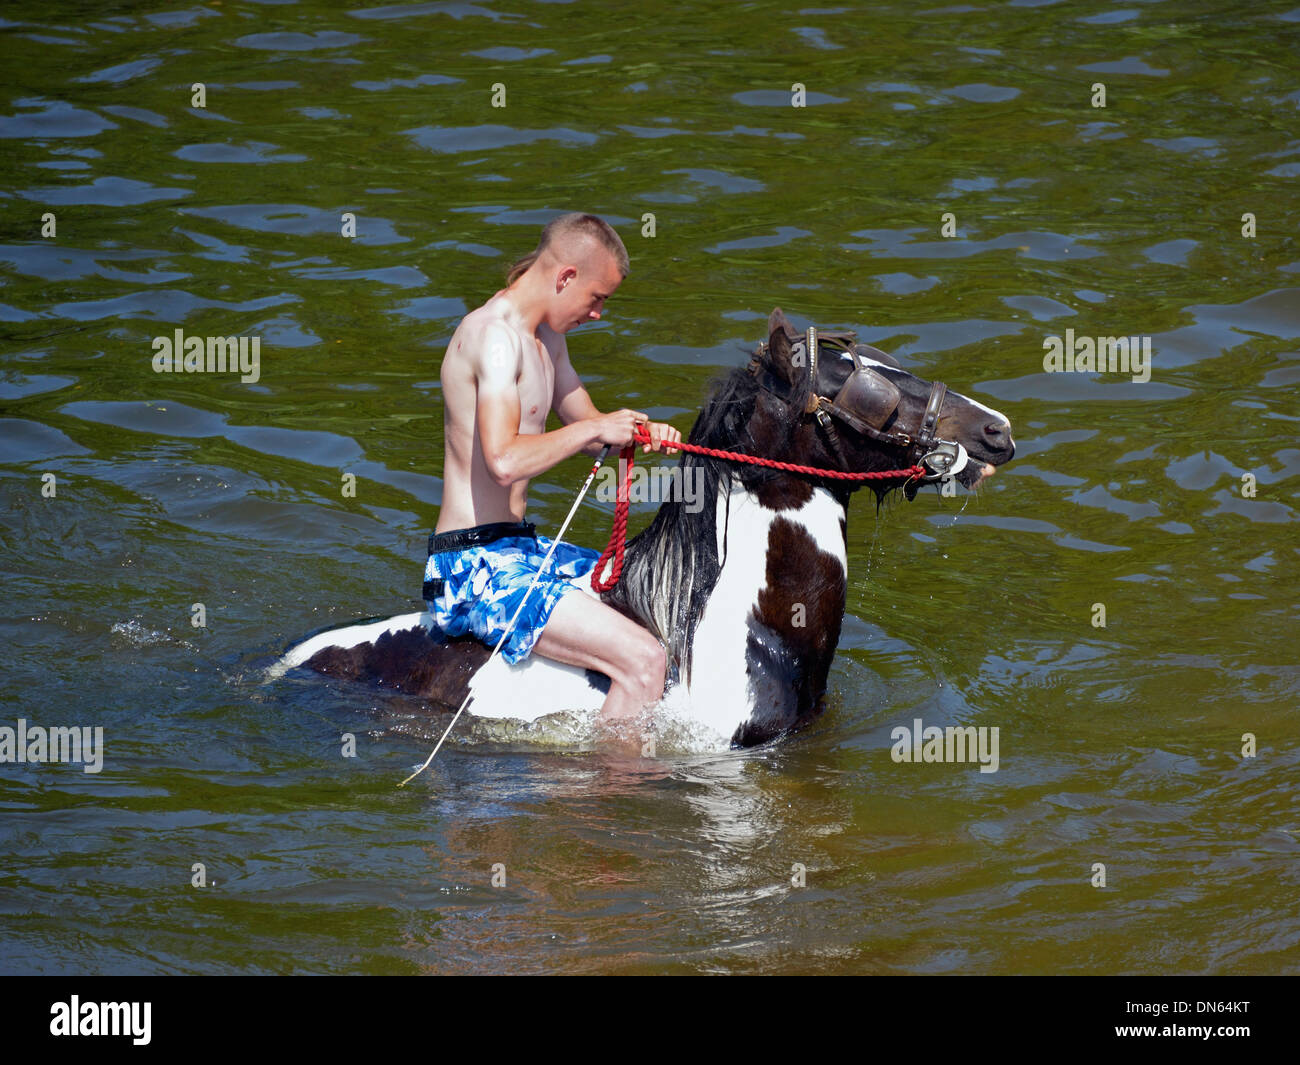 Gypsy traveller riding horse in River Eden. Appleby Horse Fair, Appleby-in-Westmorland, Cumbria, England, United Kingdom, Europe Stock Photo